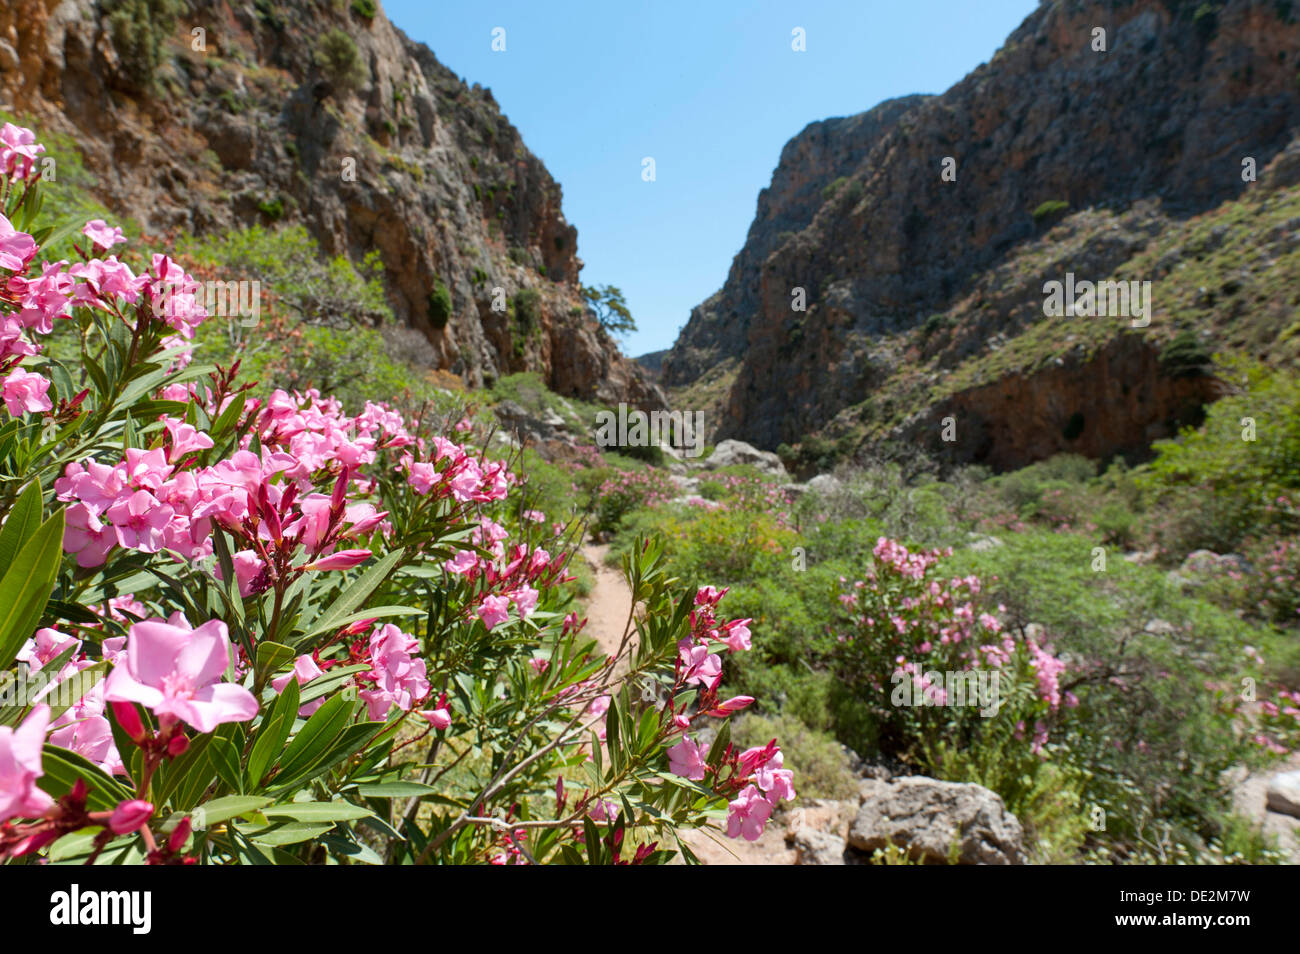 Canyon, Oleander (Nerium oleander) with pink blossoms, Zagros Gorge, near Kato Zagros, Crete, Greece, Europe Stock Photo